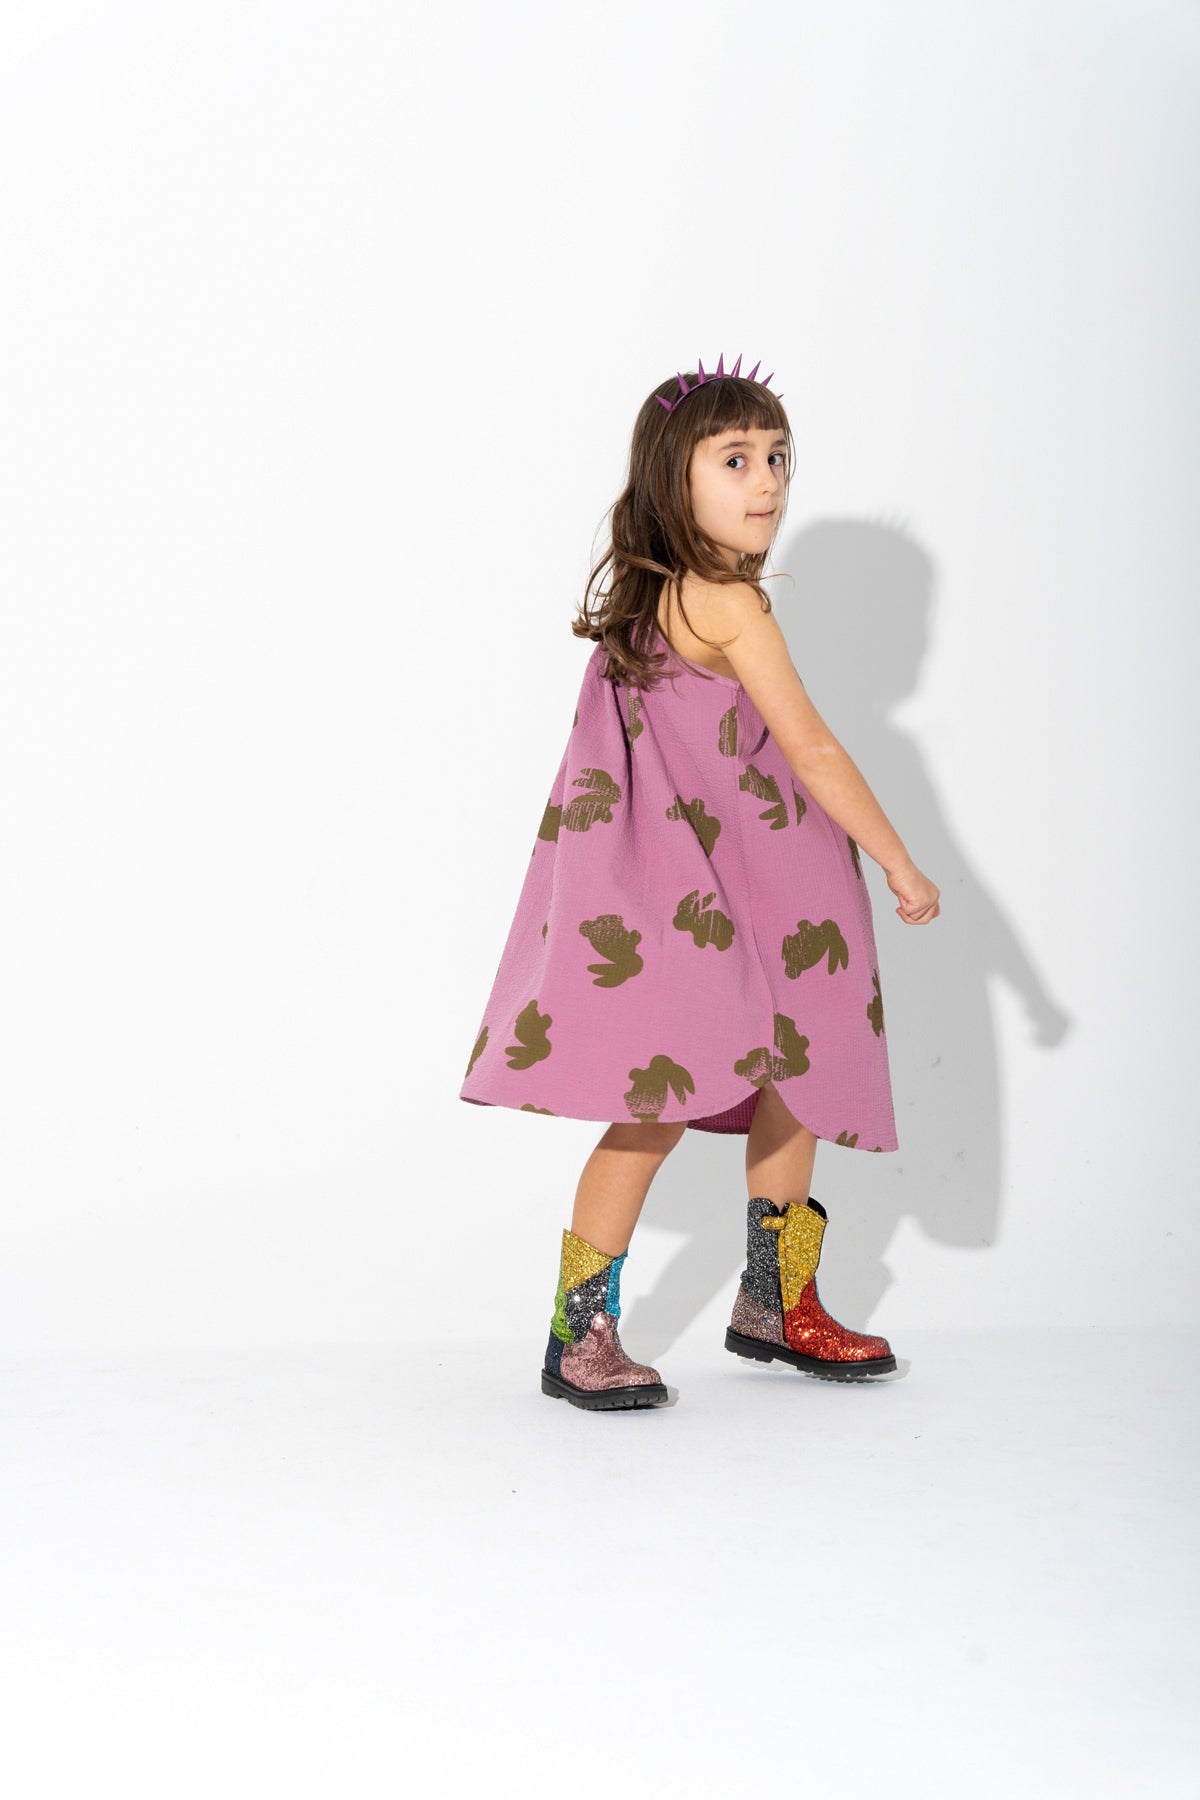 LILAC AND GREEN BUNNY PRINT STRAPPY DRESS ma kids